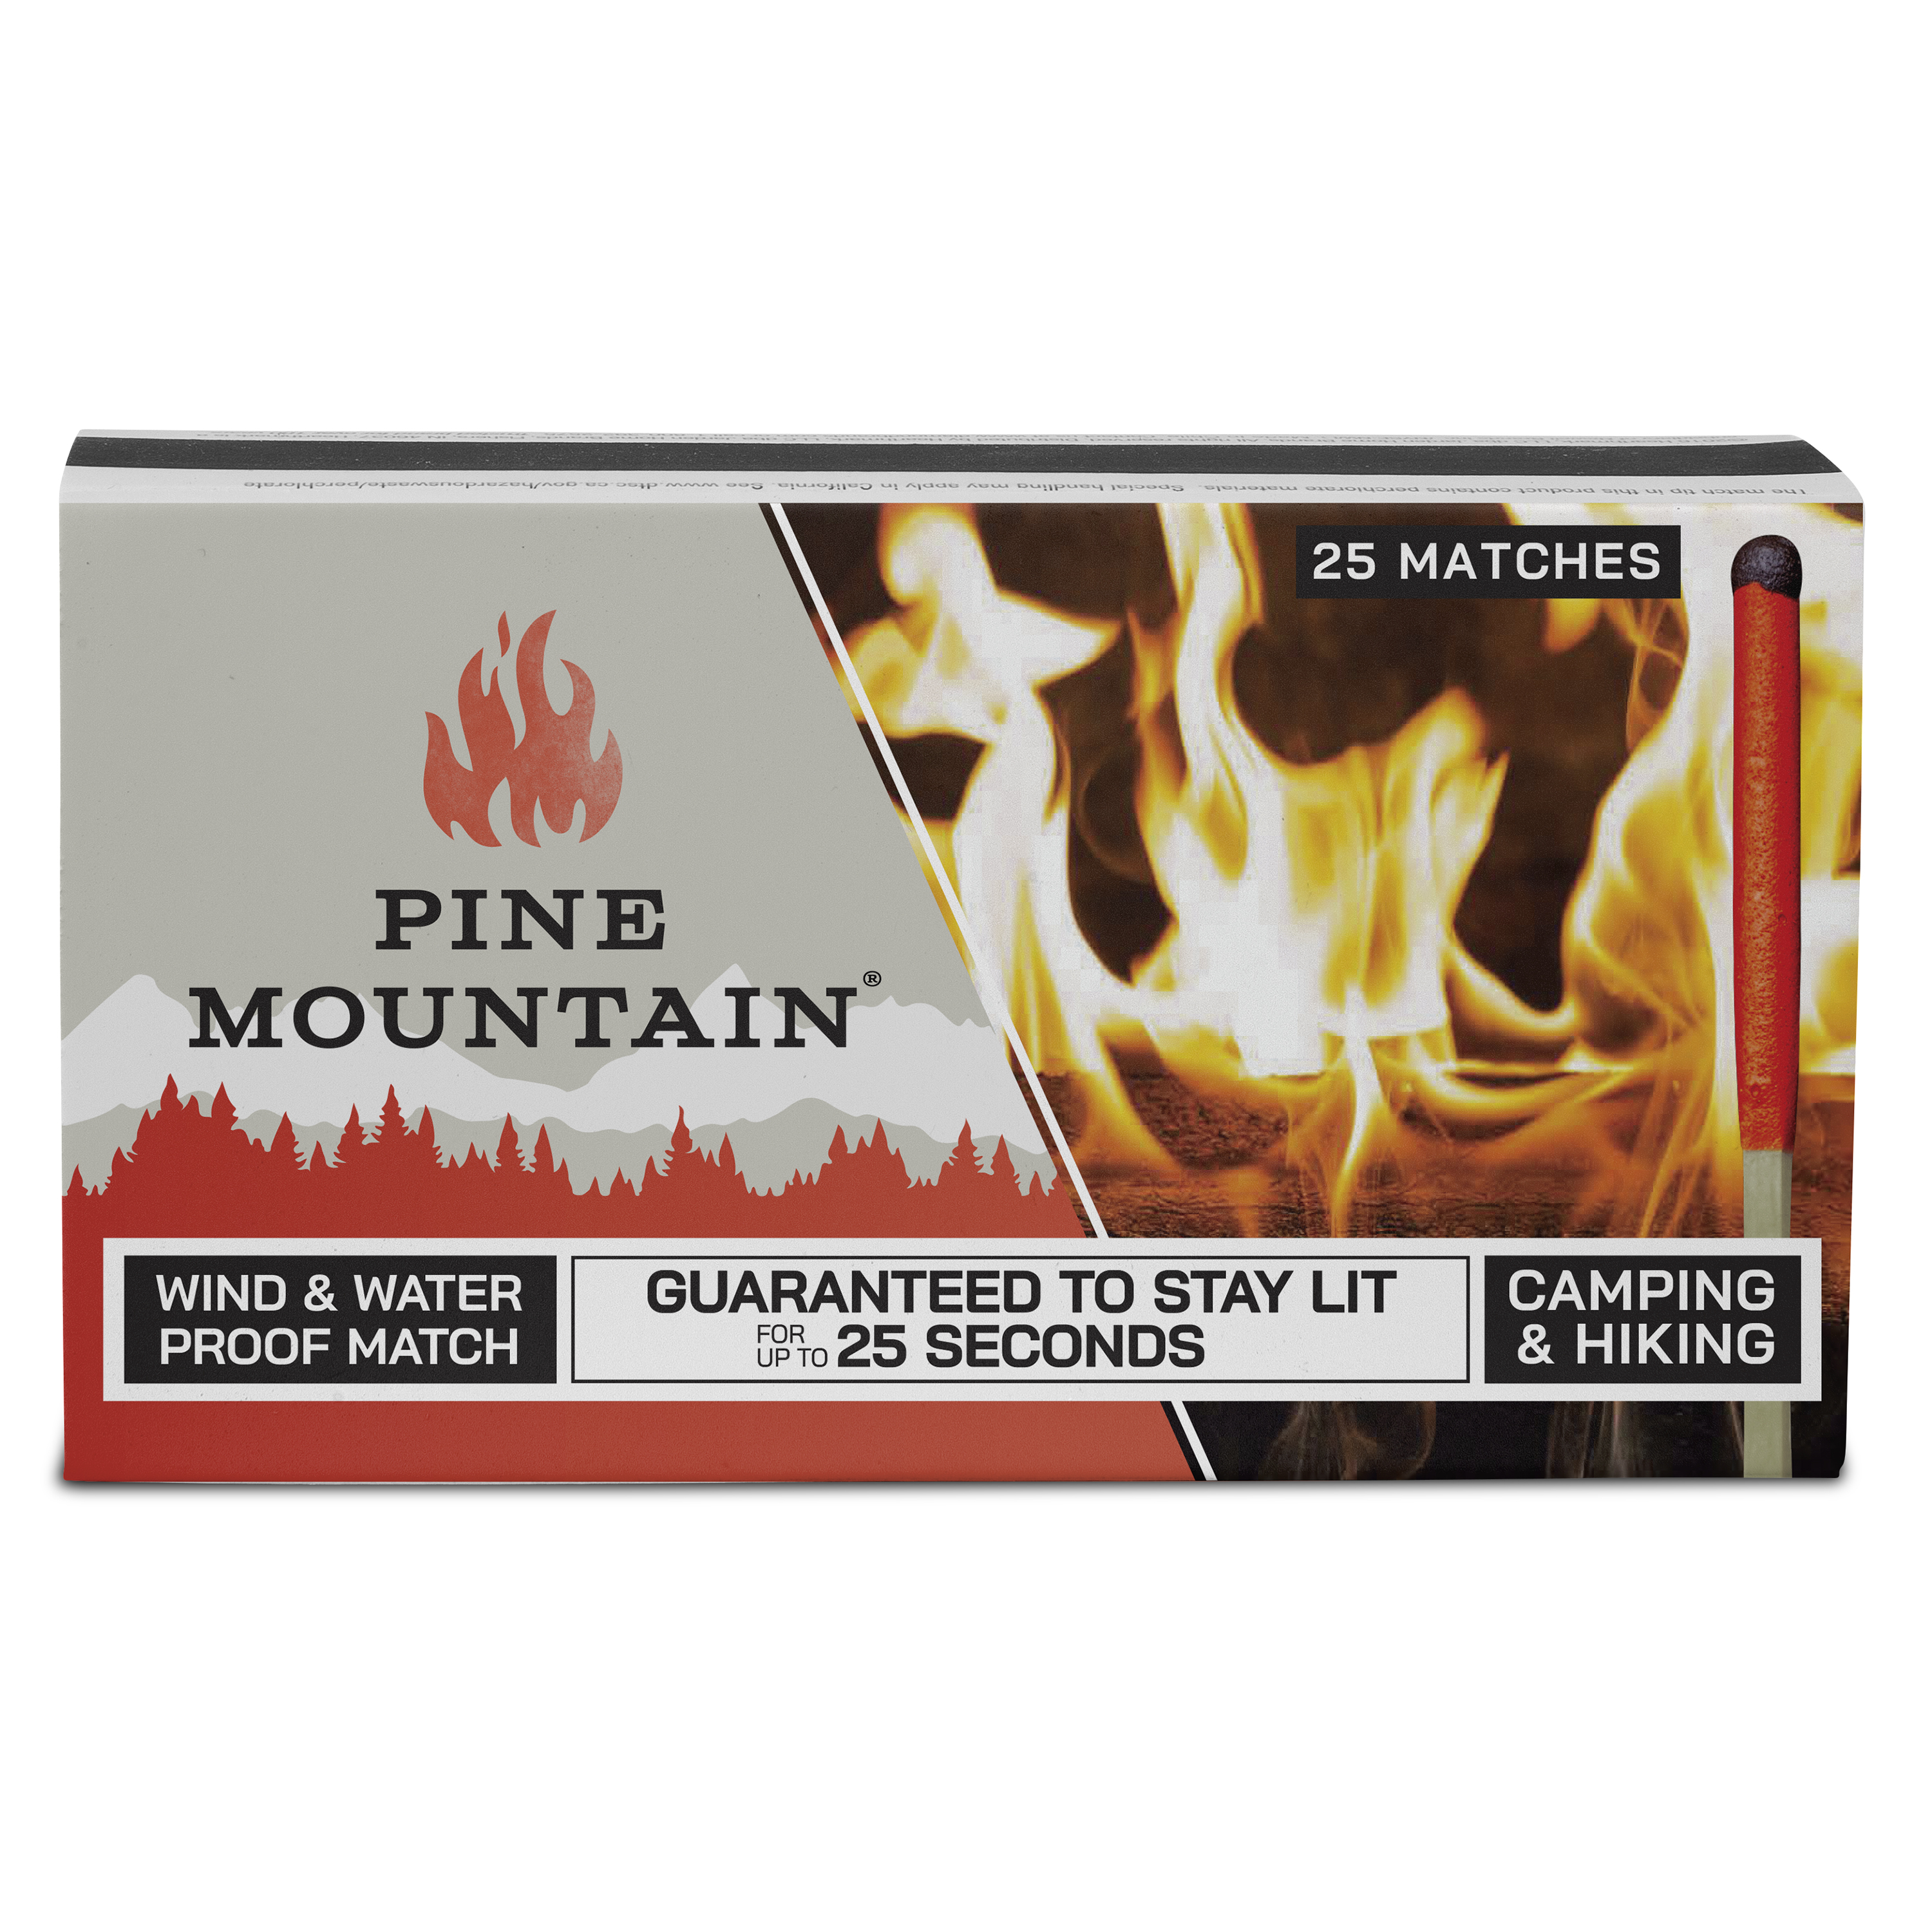 Pine Mountain Weatherproof Match, Match for Extreme Conditions, 25 Count, Tan and Red - image 1 of 5